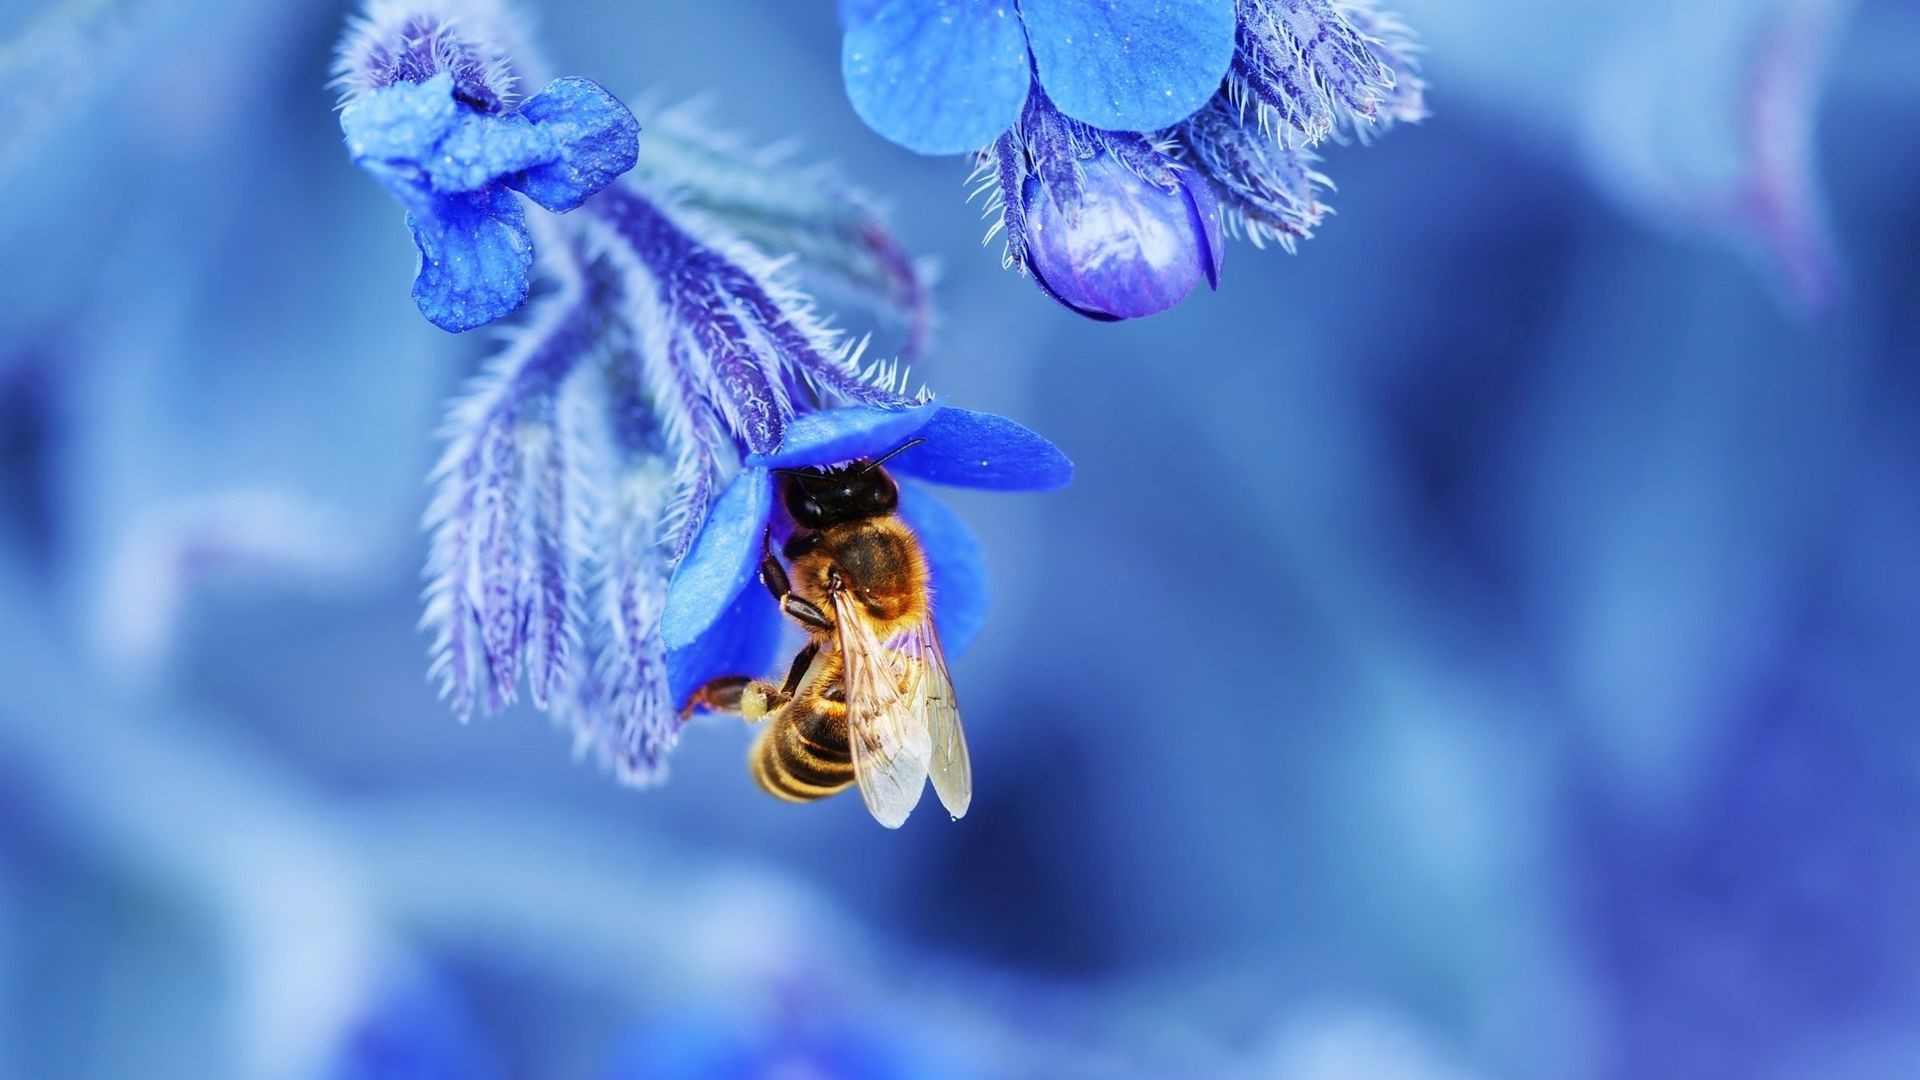 Animals___Insects_Bee_in_blue_campanula_collects_nectar_100565_.jpg